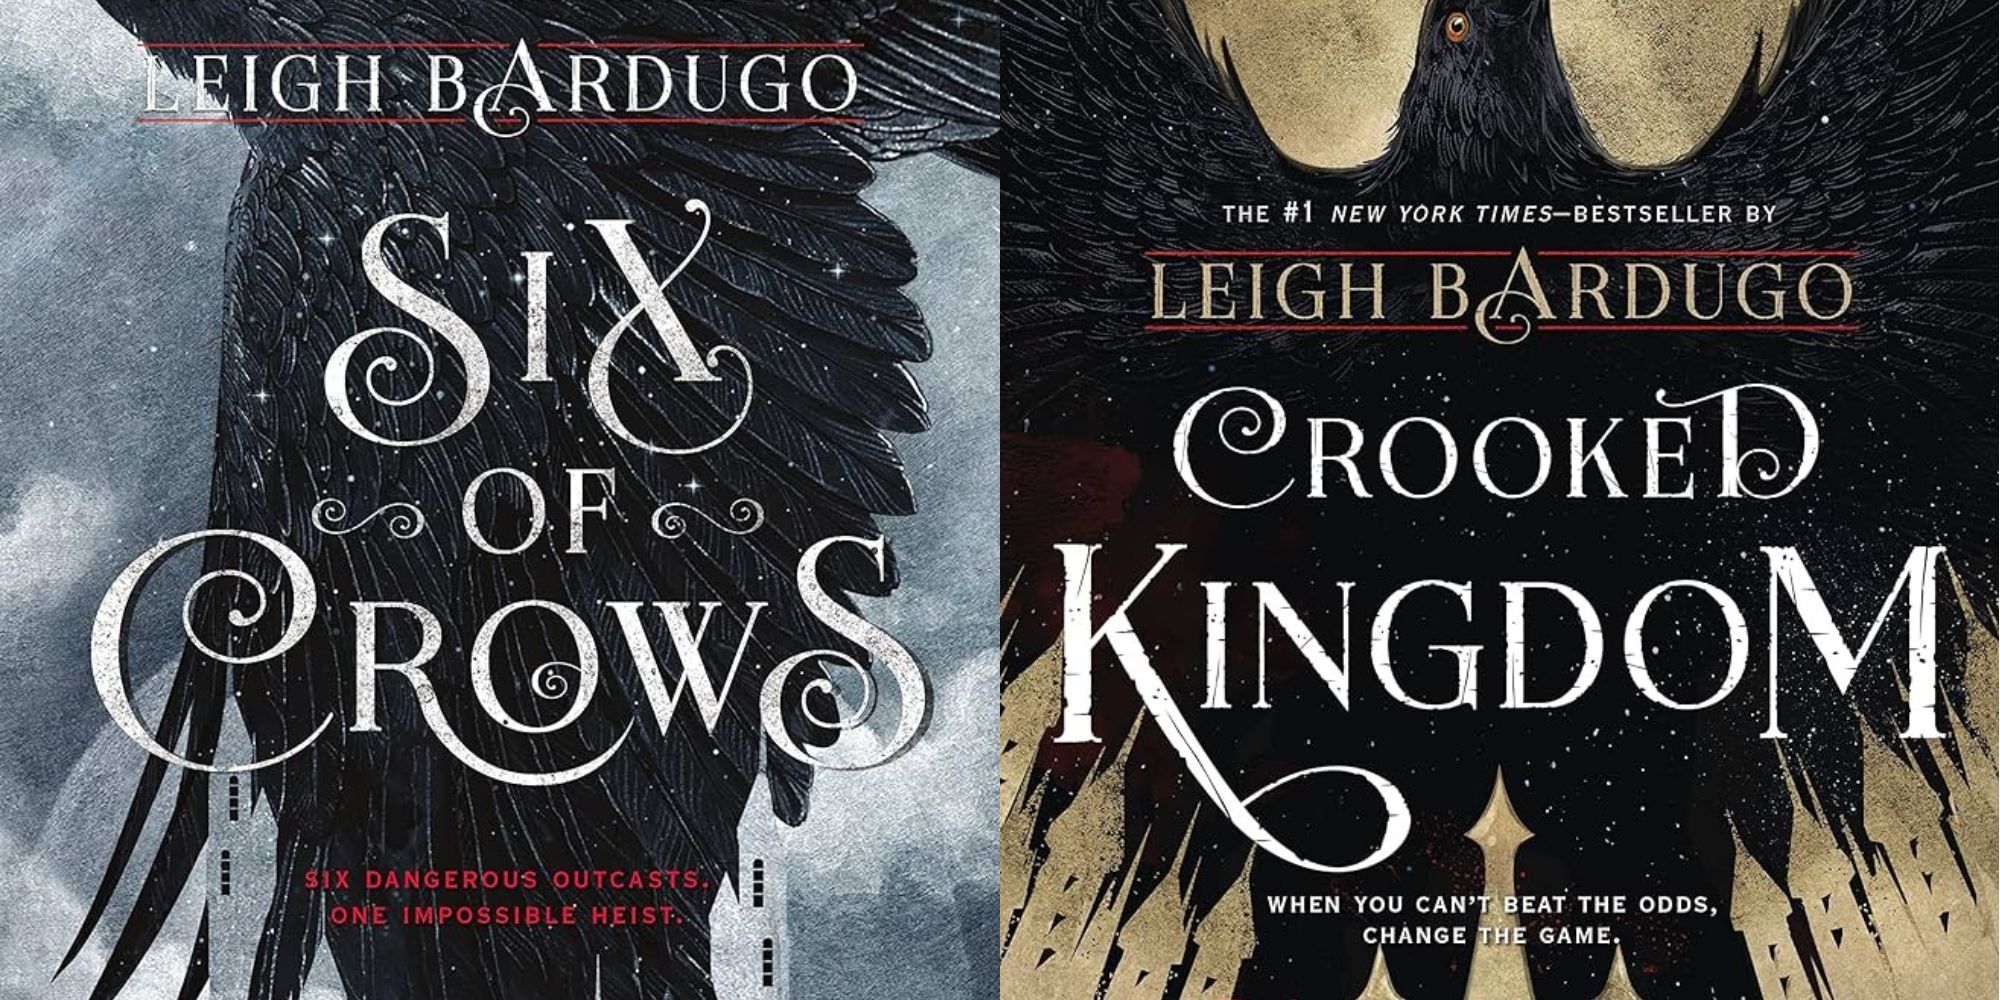 Split image six of crows and crooked kingdom book covers